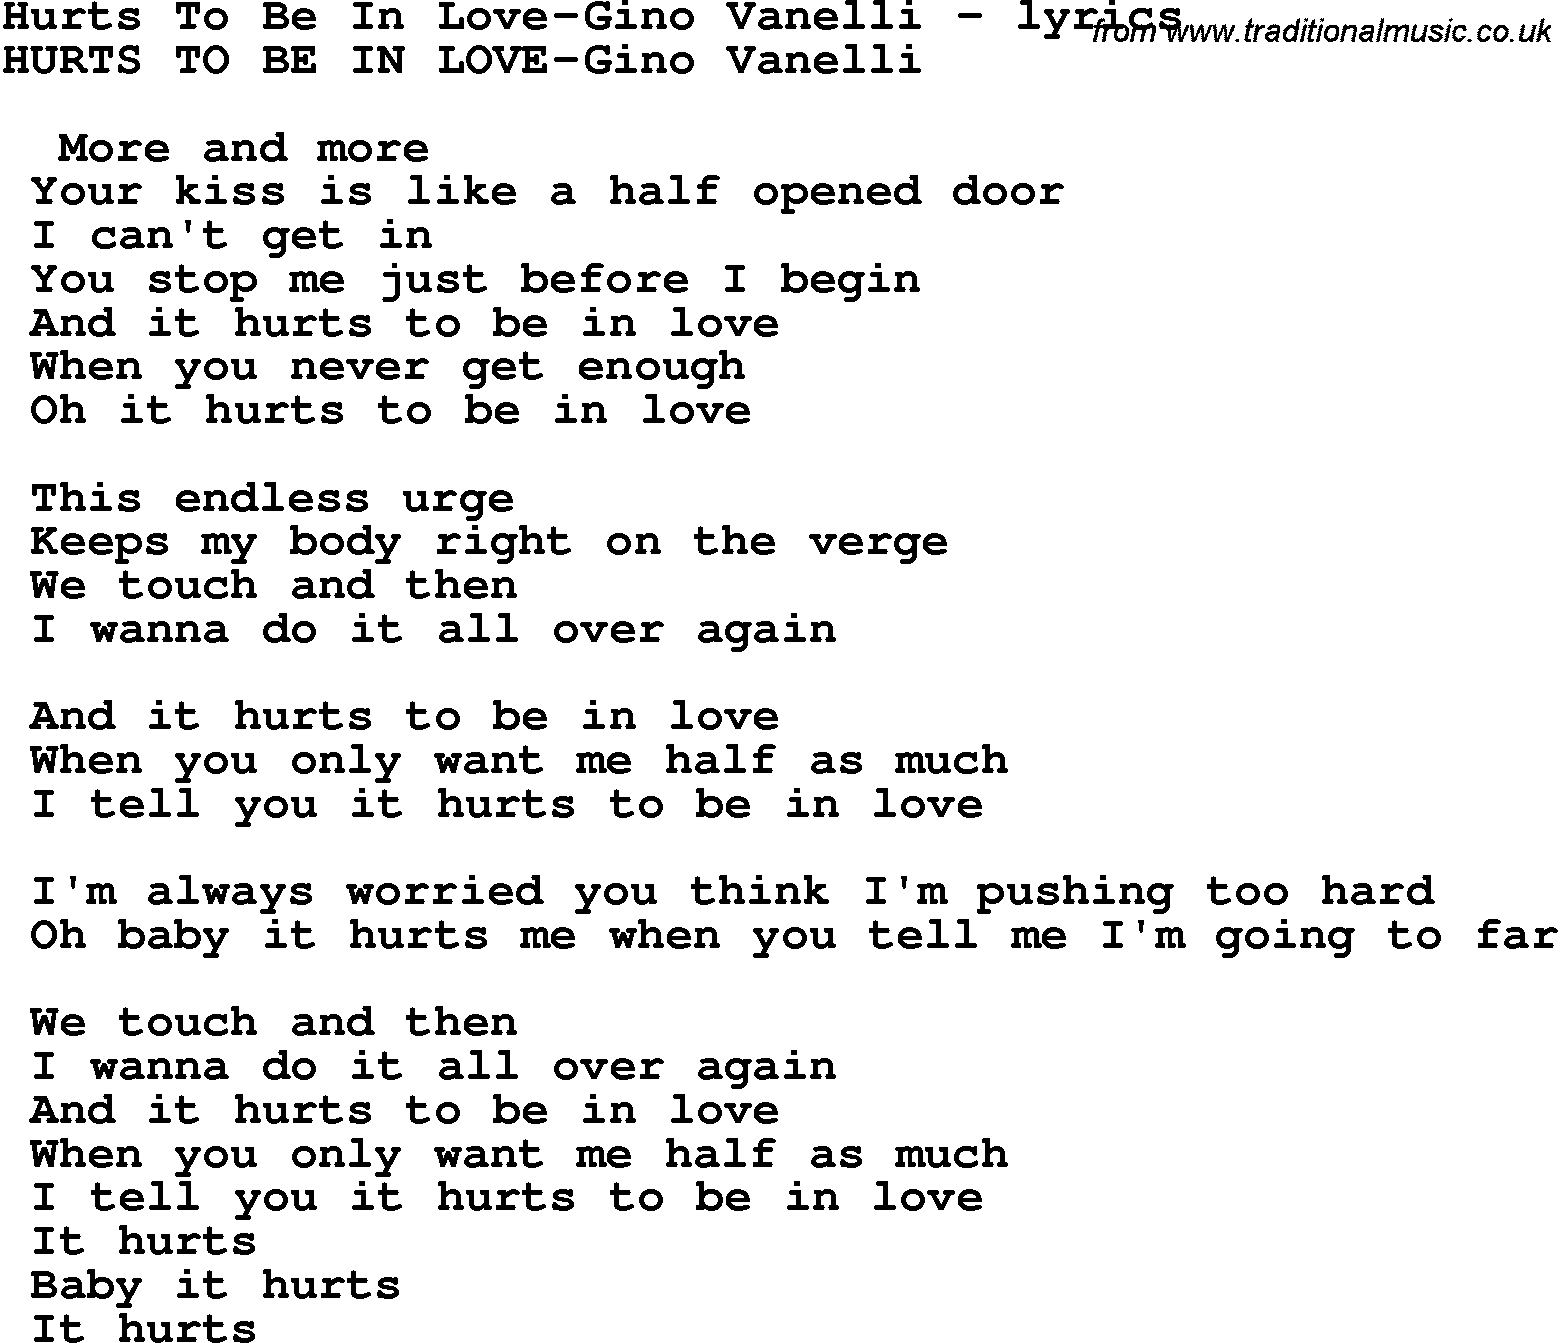 Love Song Lyrics for: Hurts To Be In Love-Gino Vanelli